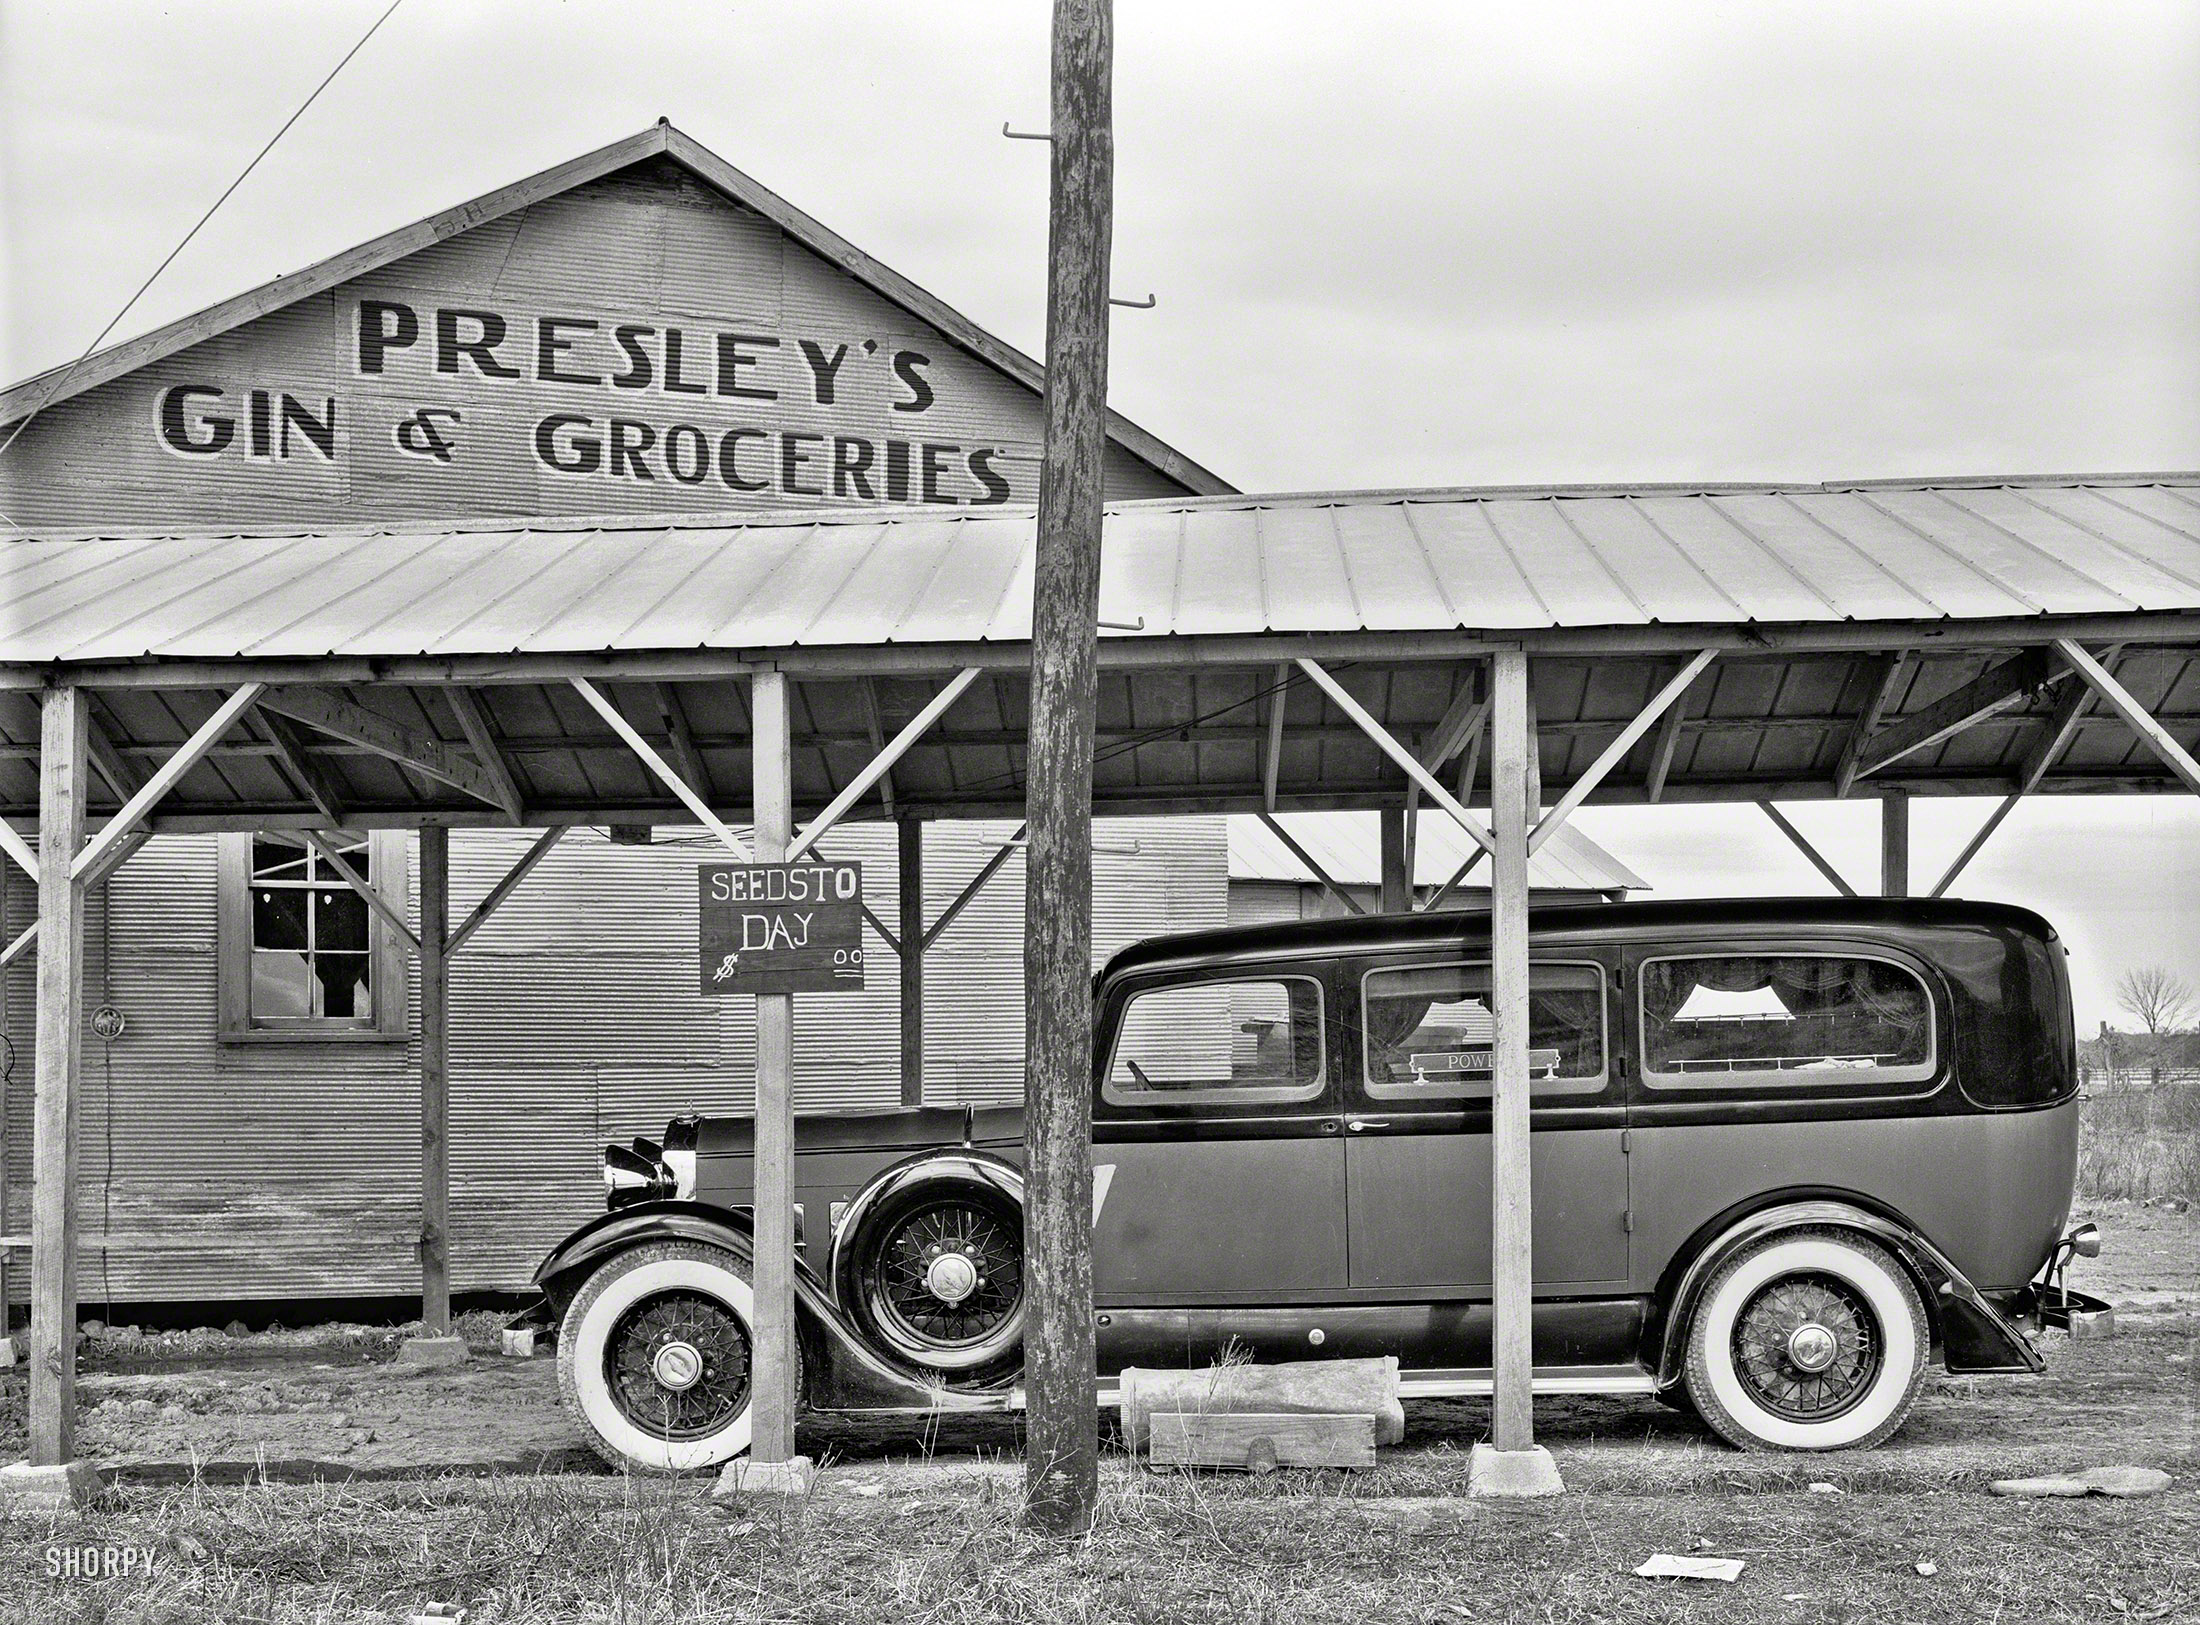 January 1939. "Funeral ambulance parked under gin shed. Mound Bayou, Mississippi." Photo by Russell Lee, Farm Security Administration. View full size.